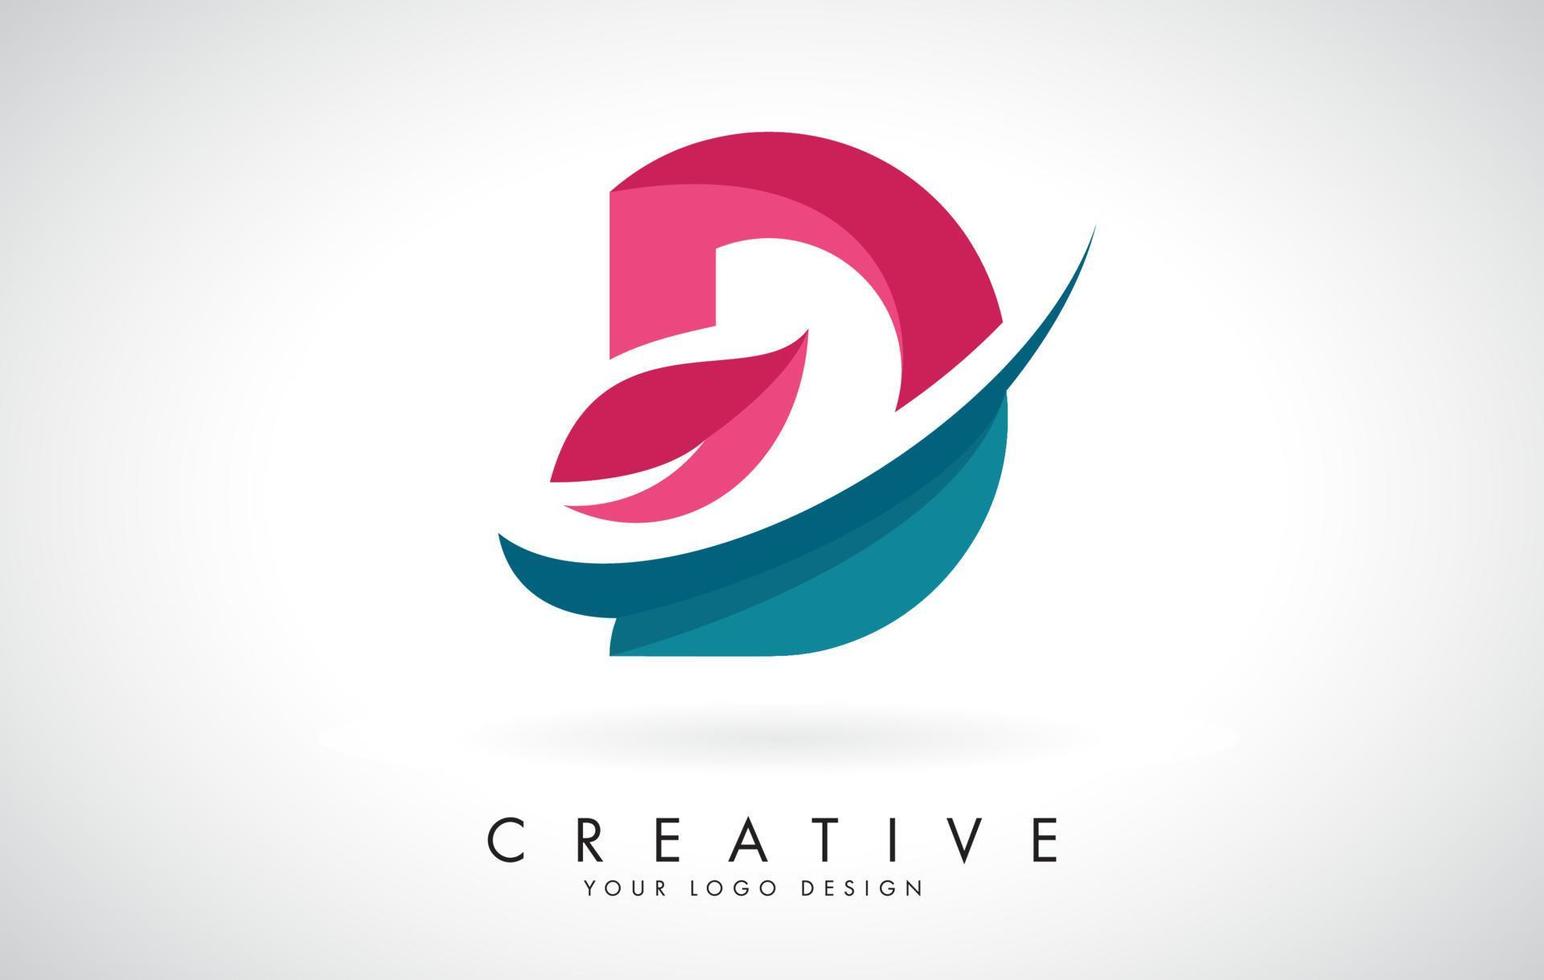 Blue and Red Letter D with Leaf and Creative Swoosh Logo Design vector